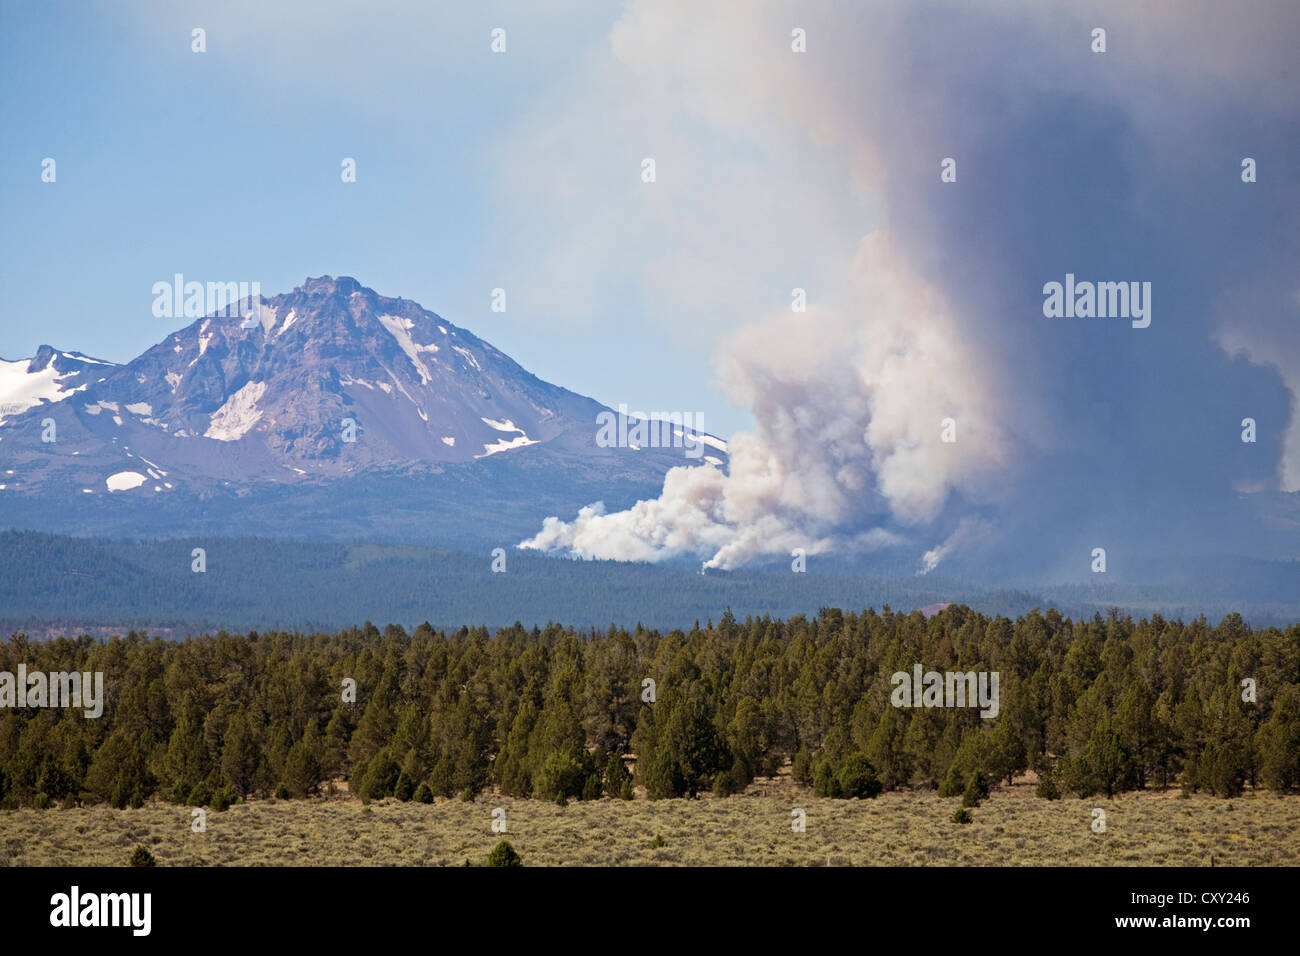 A forest fire burns in the Deschutes National Forest near North Sisters Peak, in Central Oregon Stock Photo